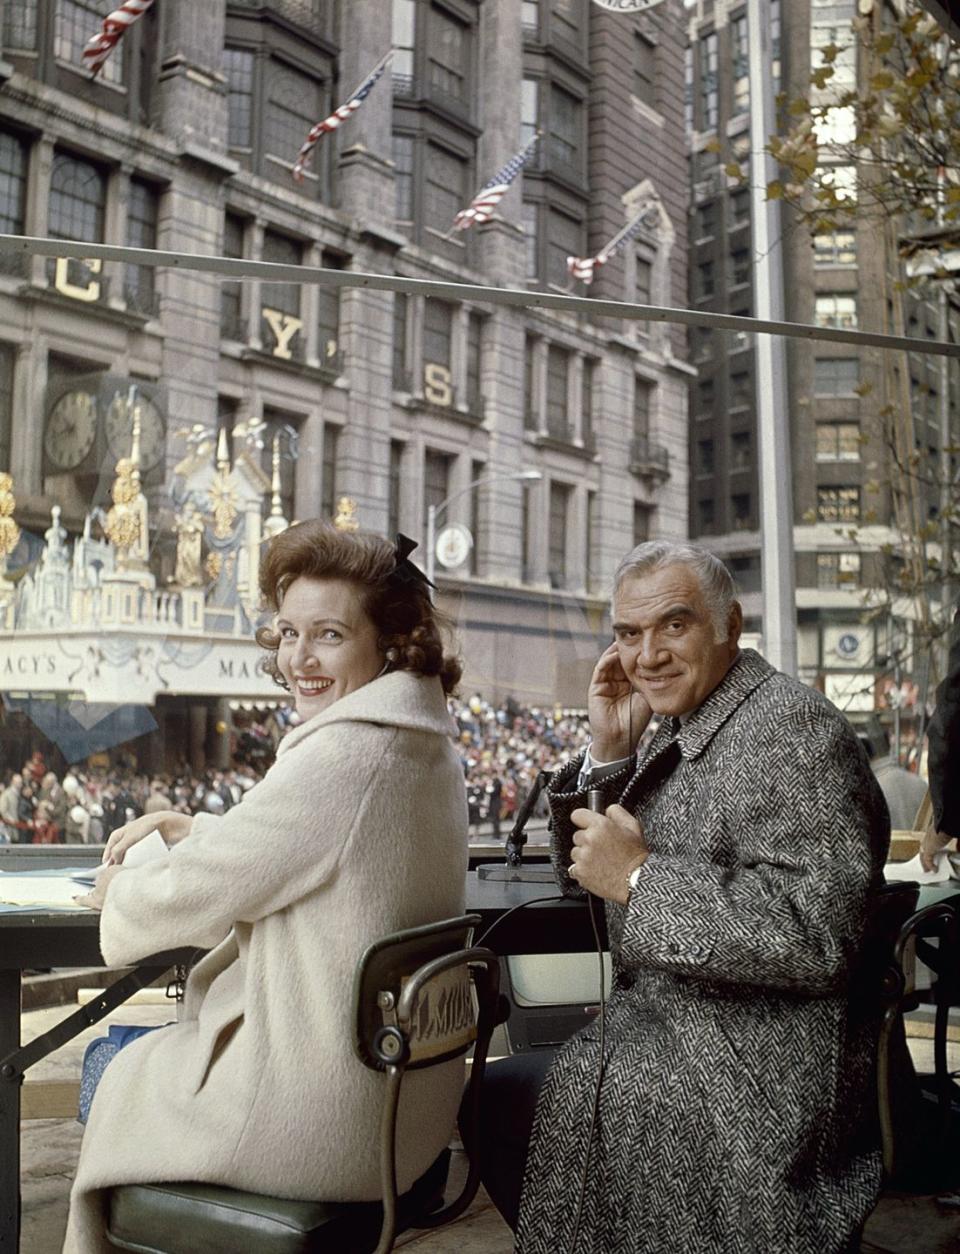 1965: Co-hosting the Thanksgiving parade